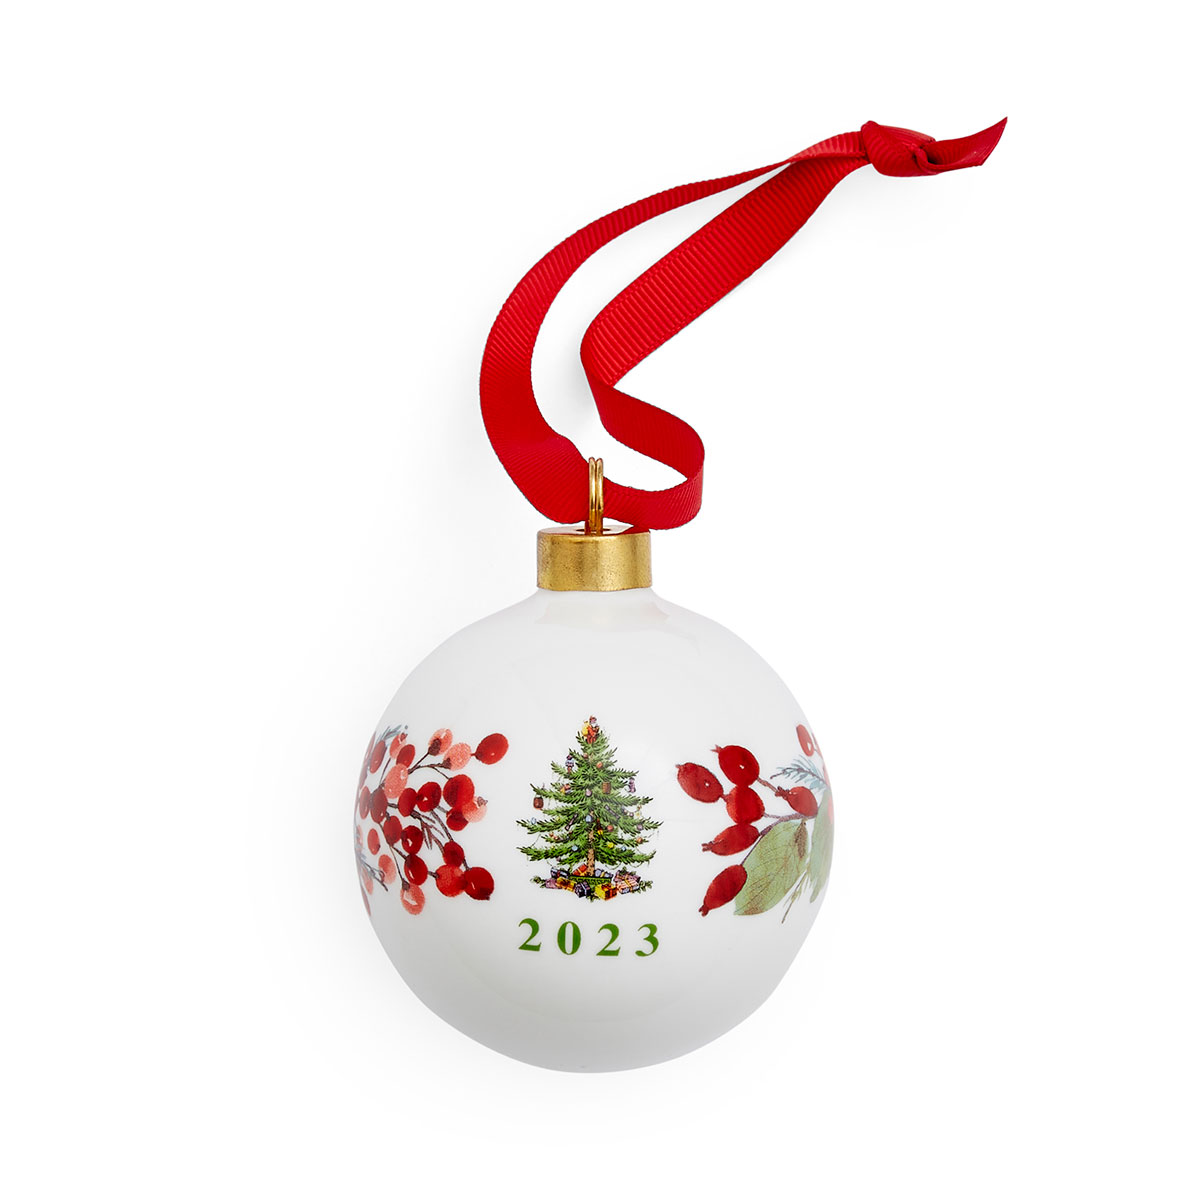 Spode 2023 Christmas Tree Annual Dated Bauble Ornament